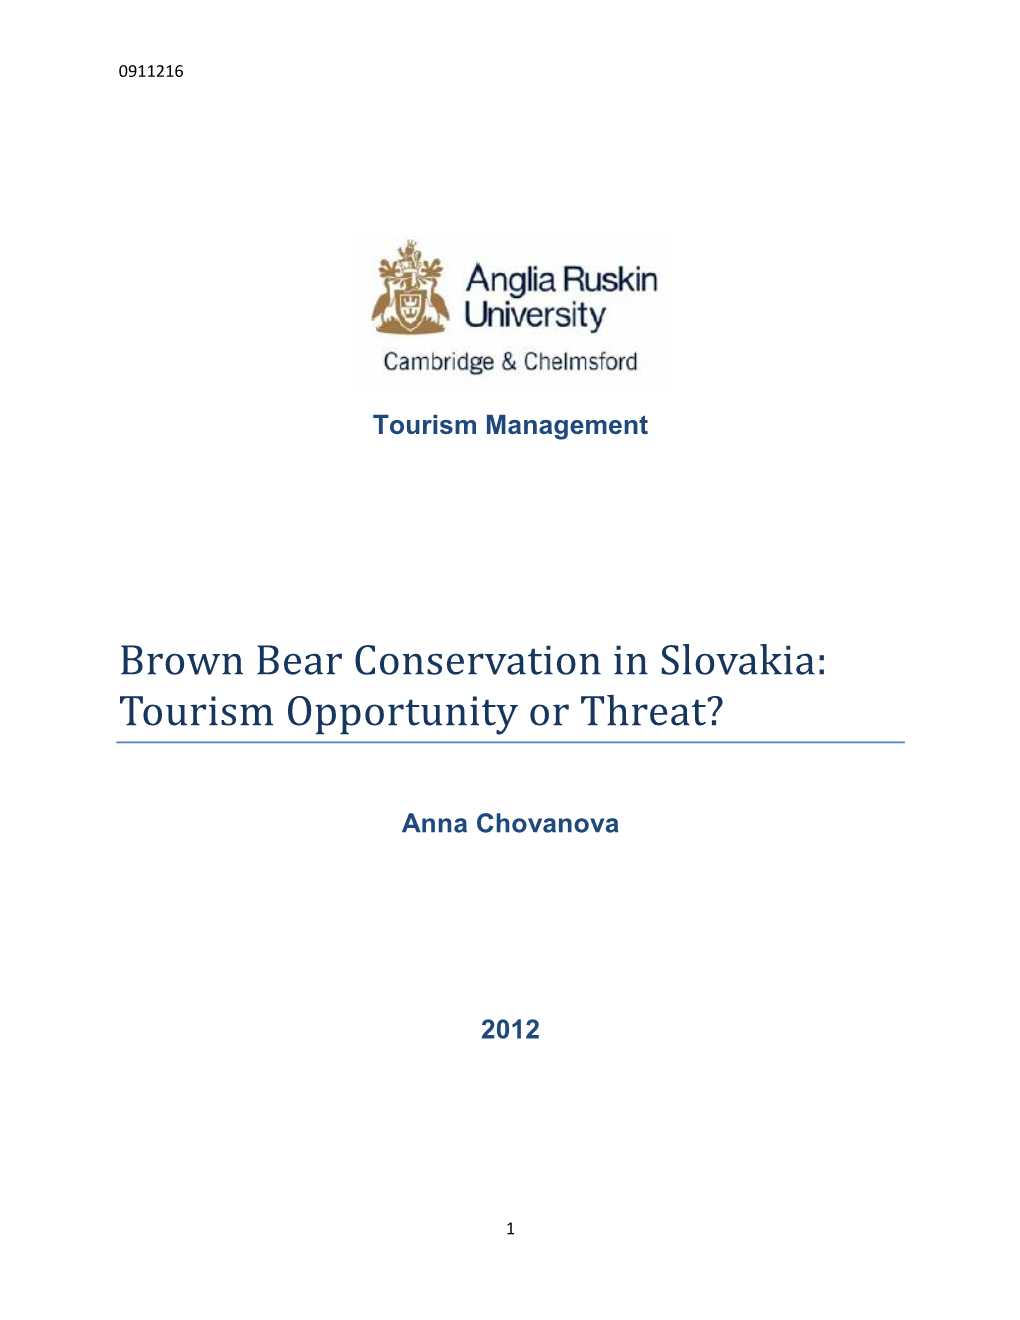 Brown Bear Conservation in Slovakia: Tourism Opportunity Or Threat?